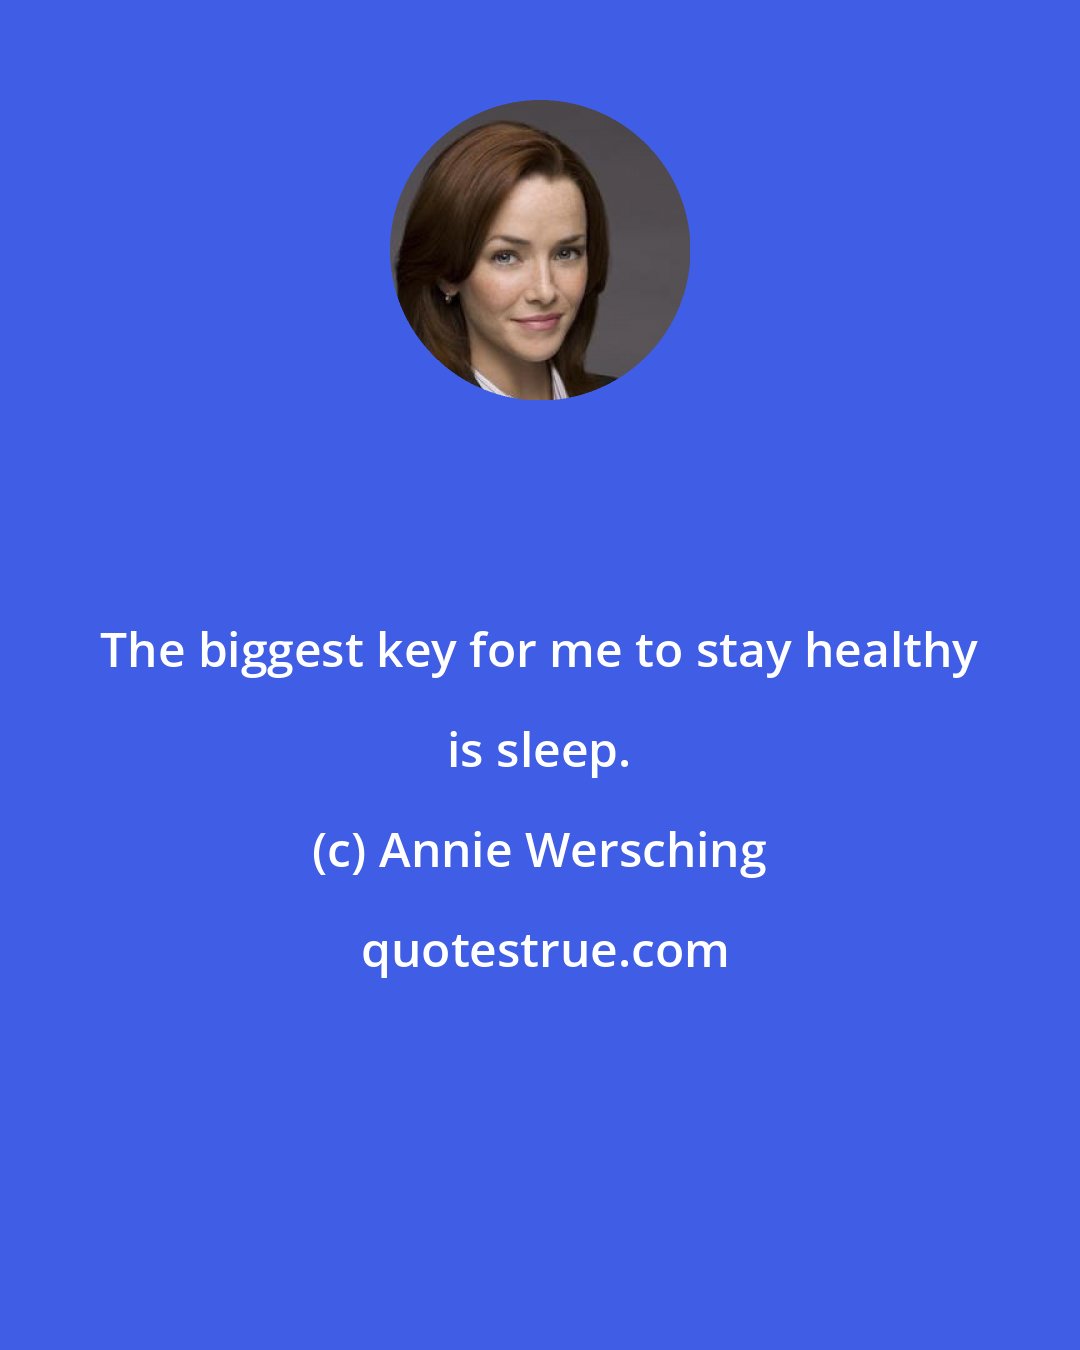 Annie Wersching: The biggest key for me to stay healthy is sleep.